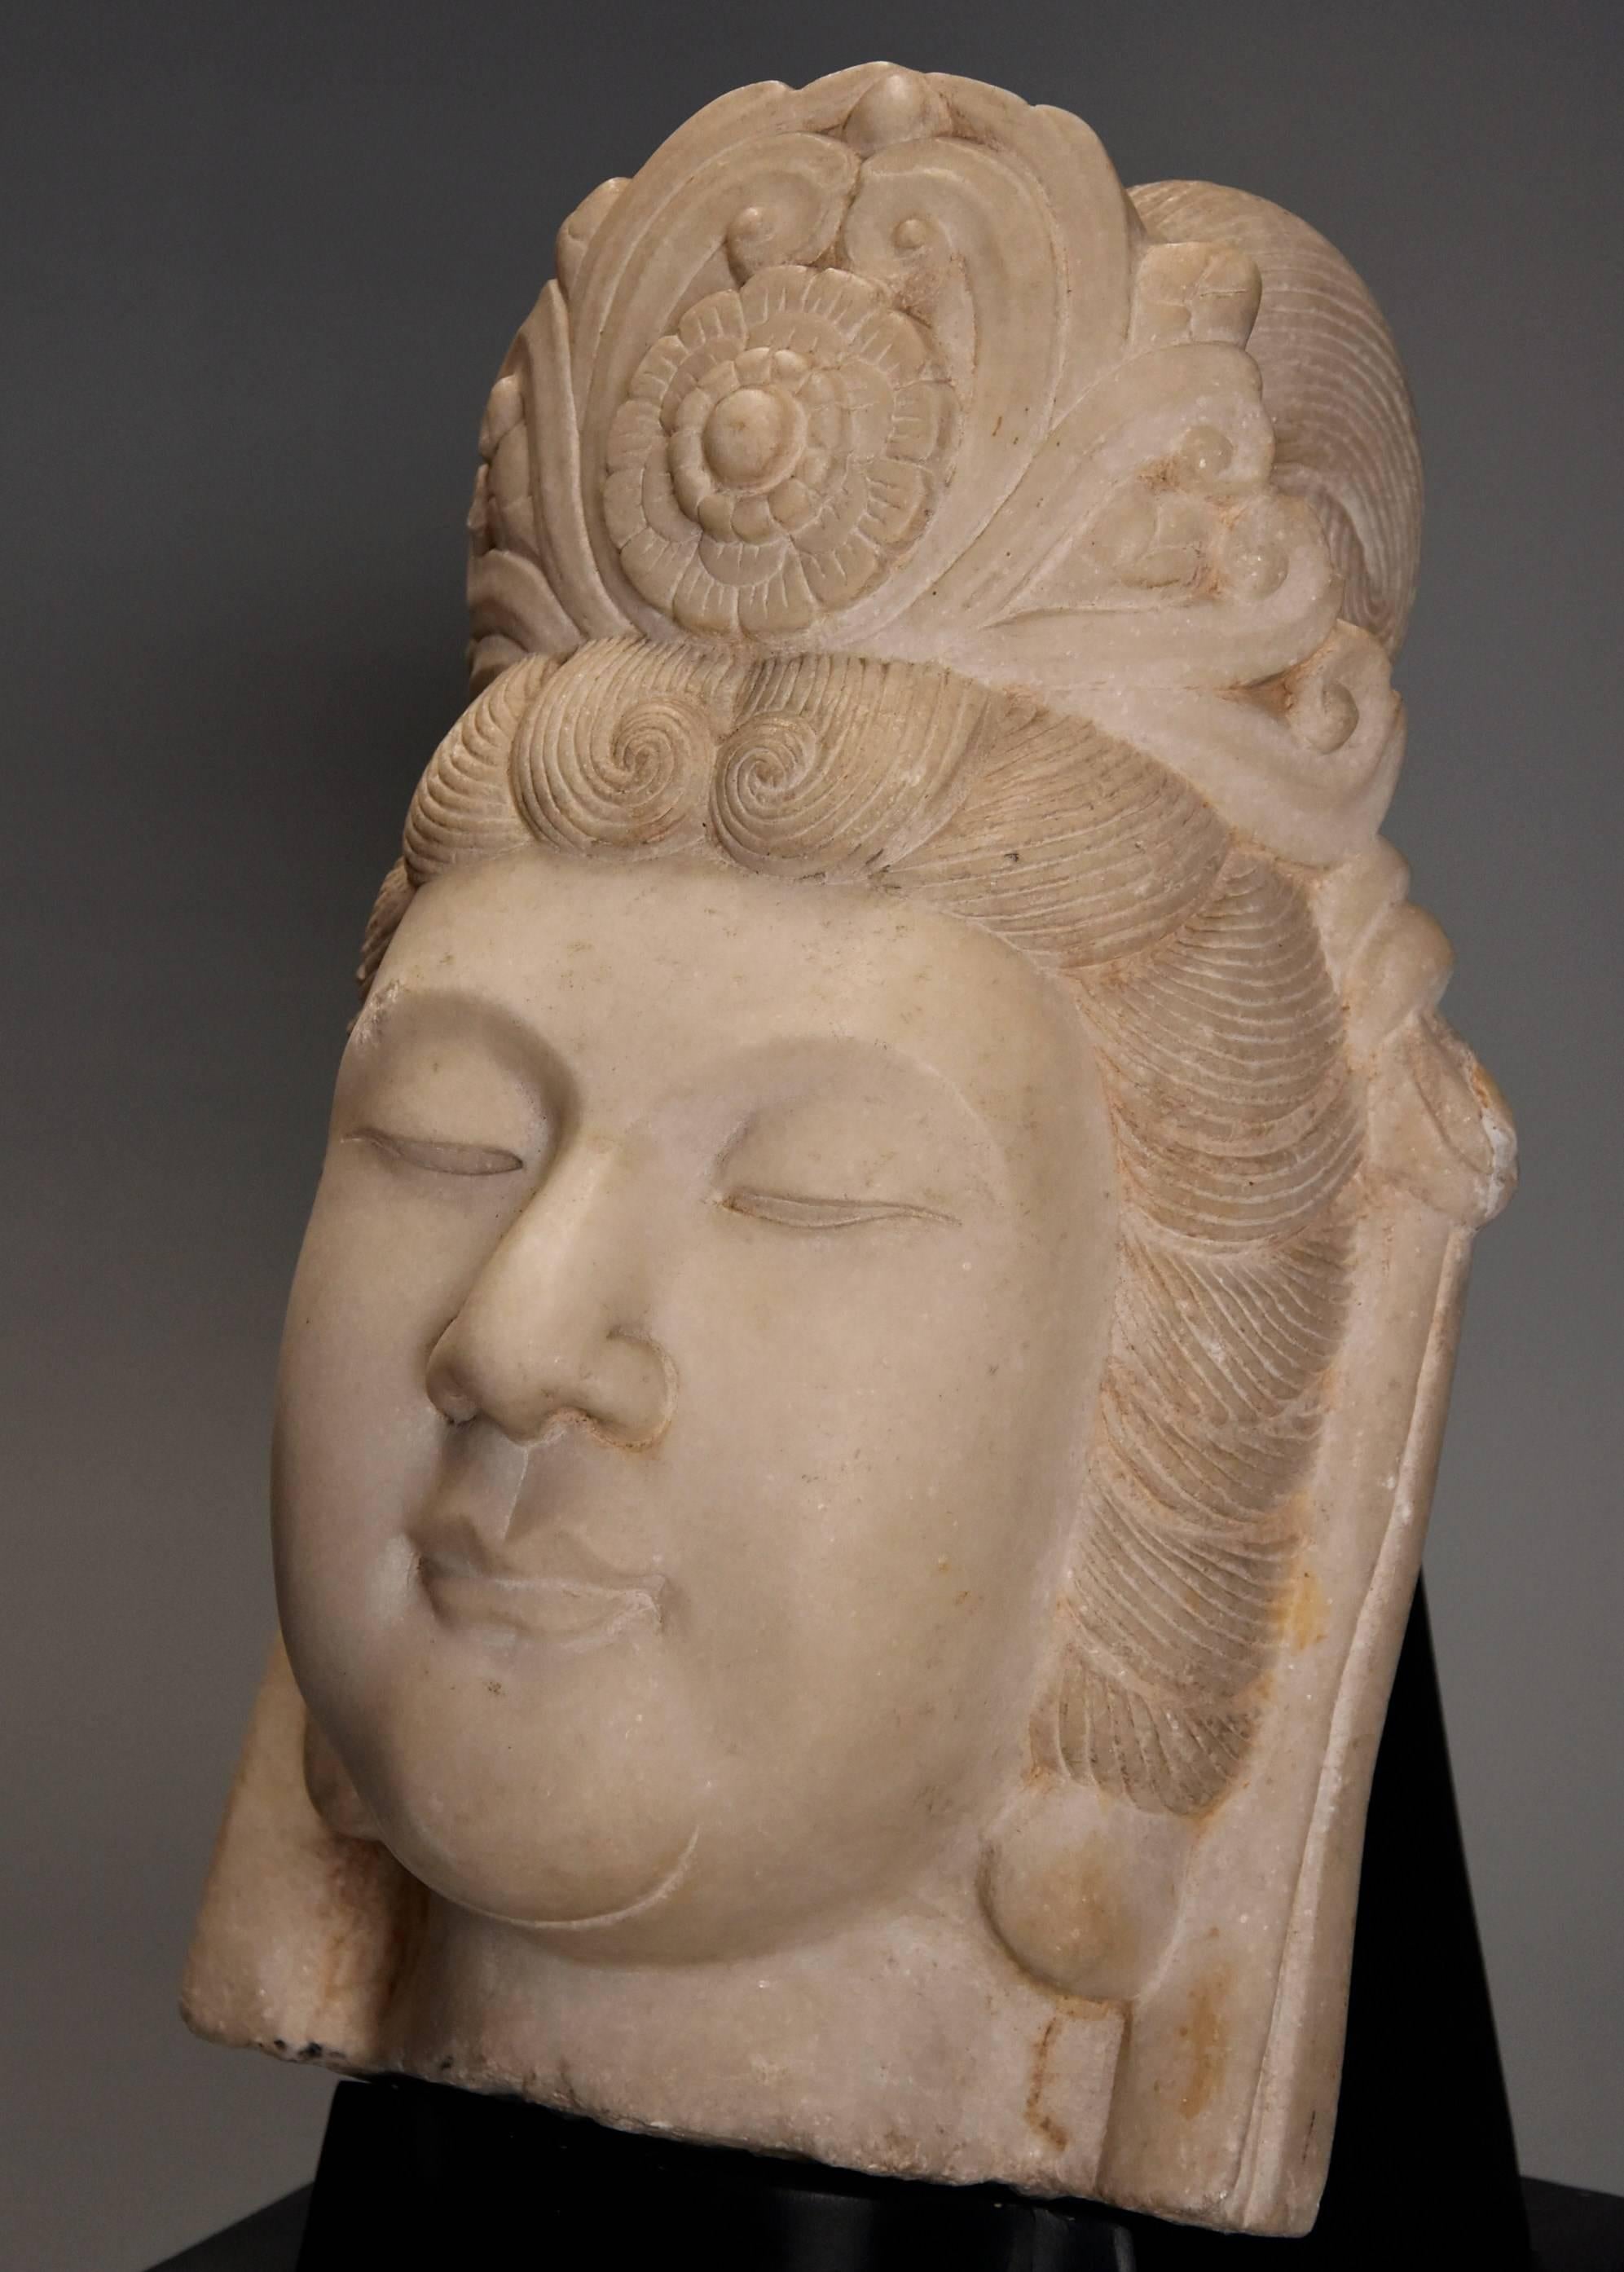 A 20th century highly decorative carved marble head of Guan Yin, on later painted wooden stand.

Guan Yin is known as the Bodhisattva of infinite compassion in East Asian Buddhism, known as the ‘Goddess of Mercy’ in the English language.

This